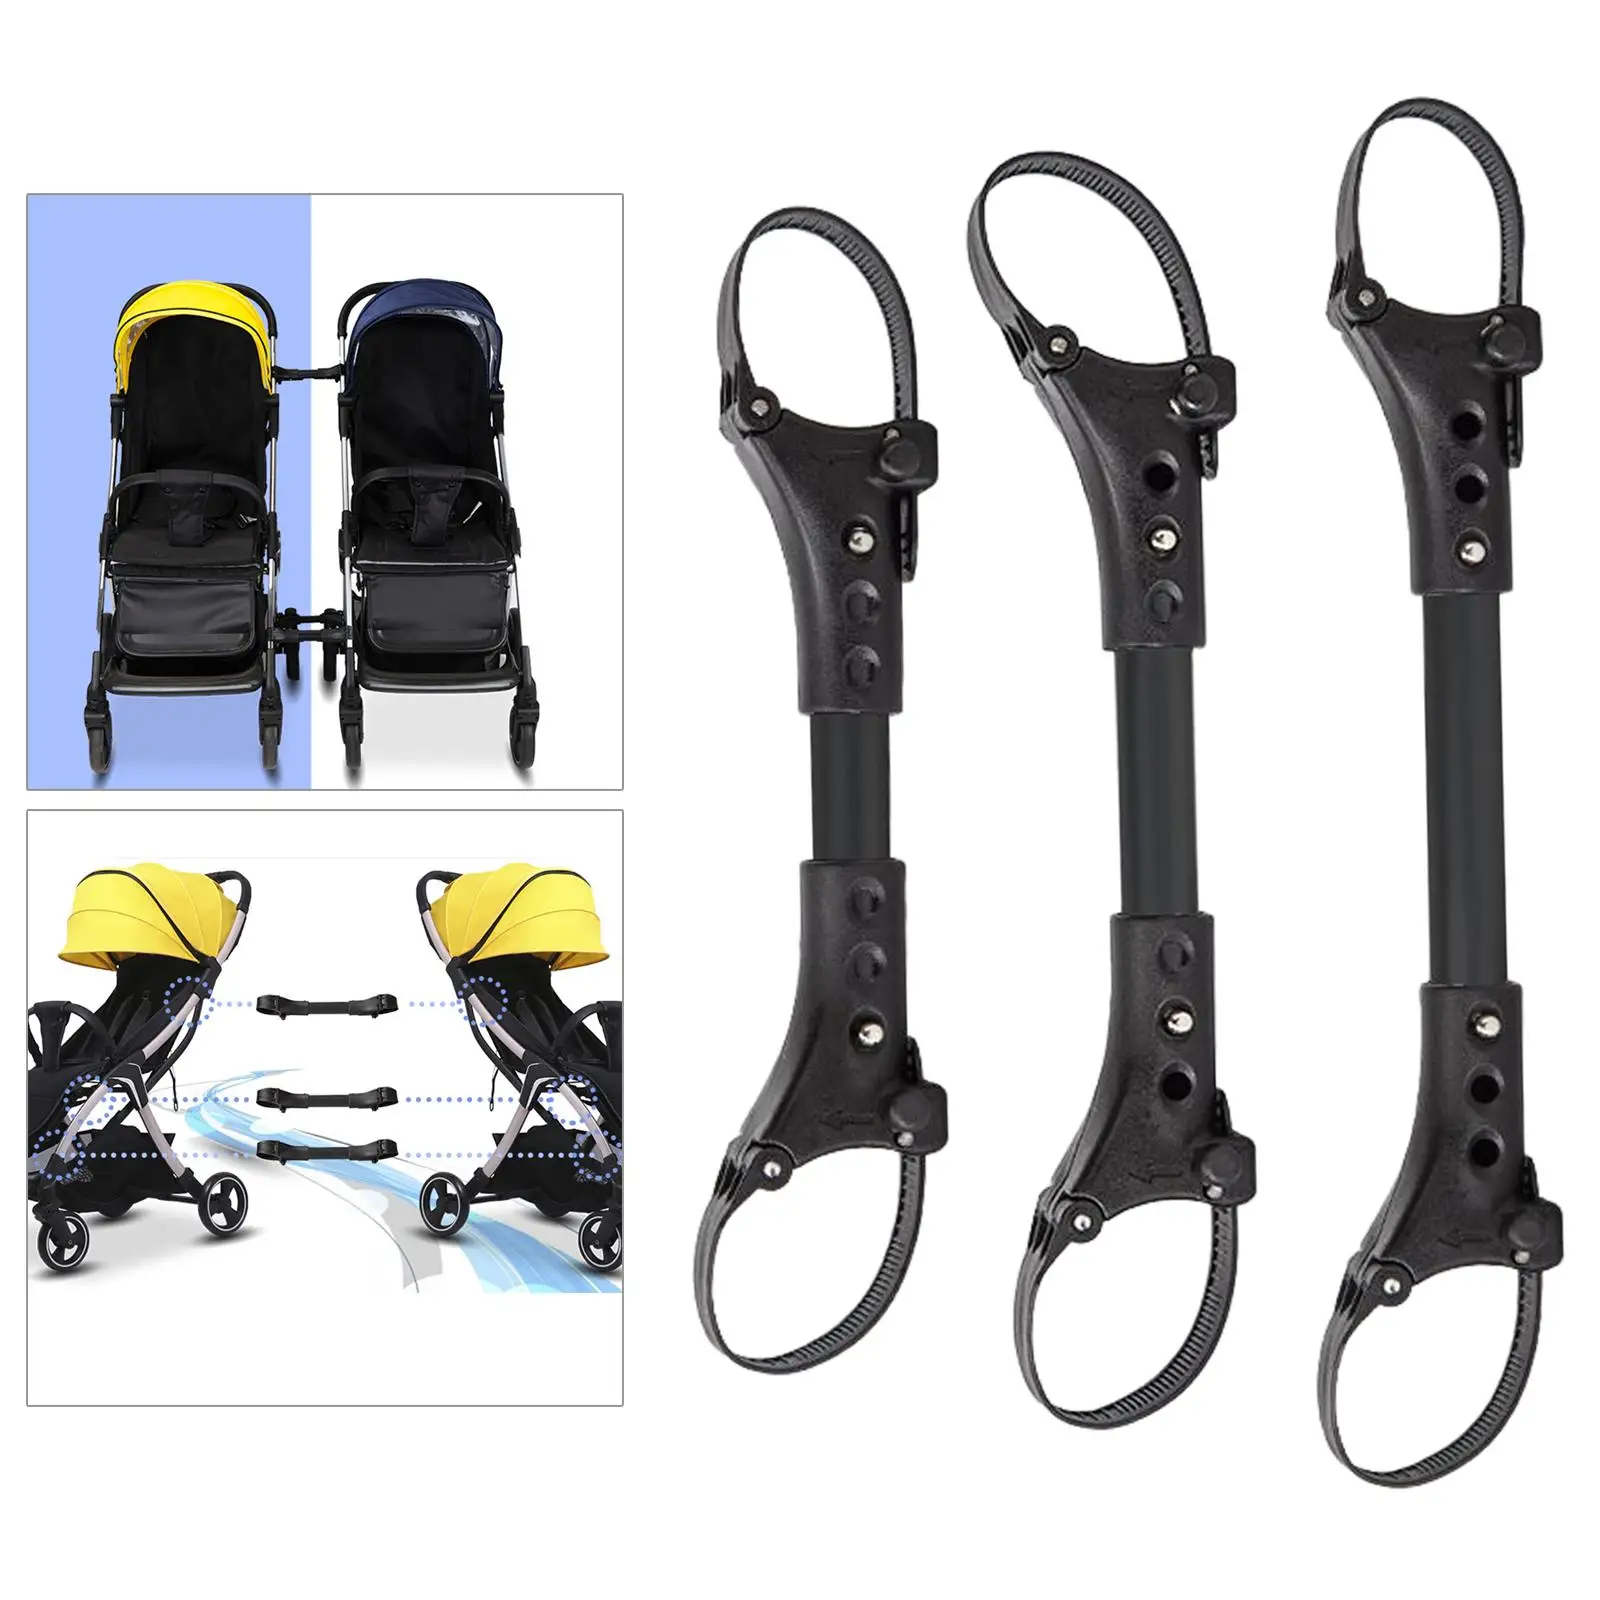 3Pcs Twin Baby Stroller Connector Secure Strap Attachment for Infant Cart